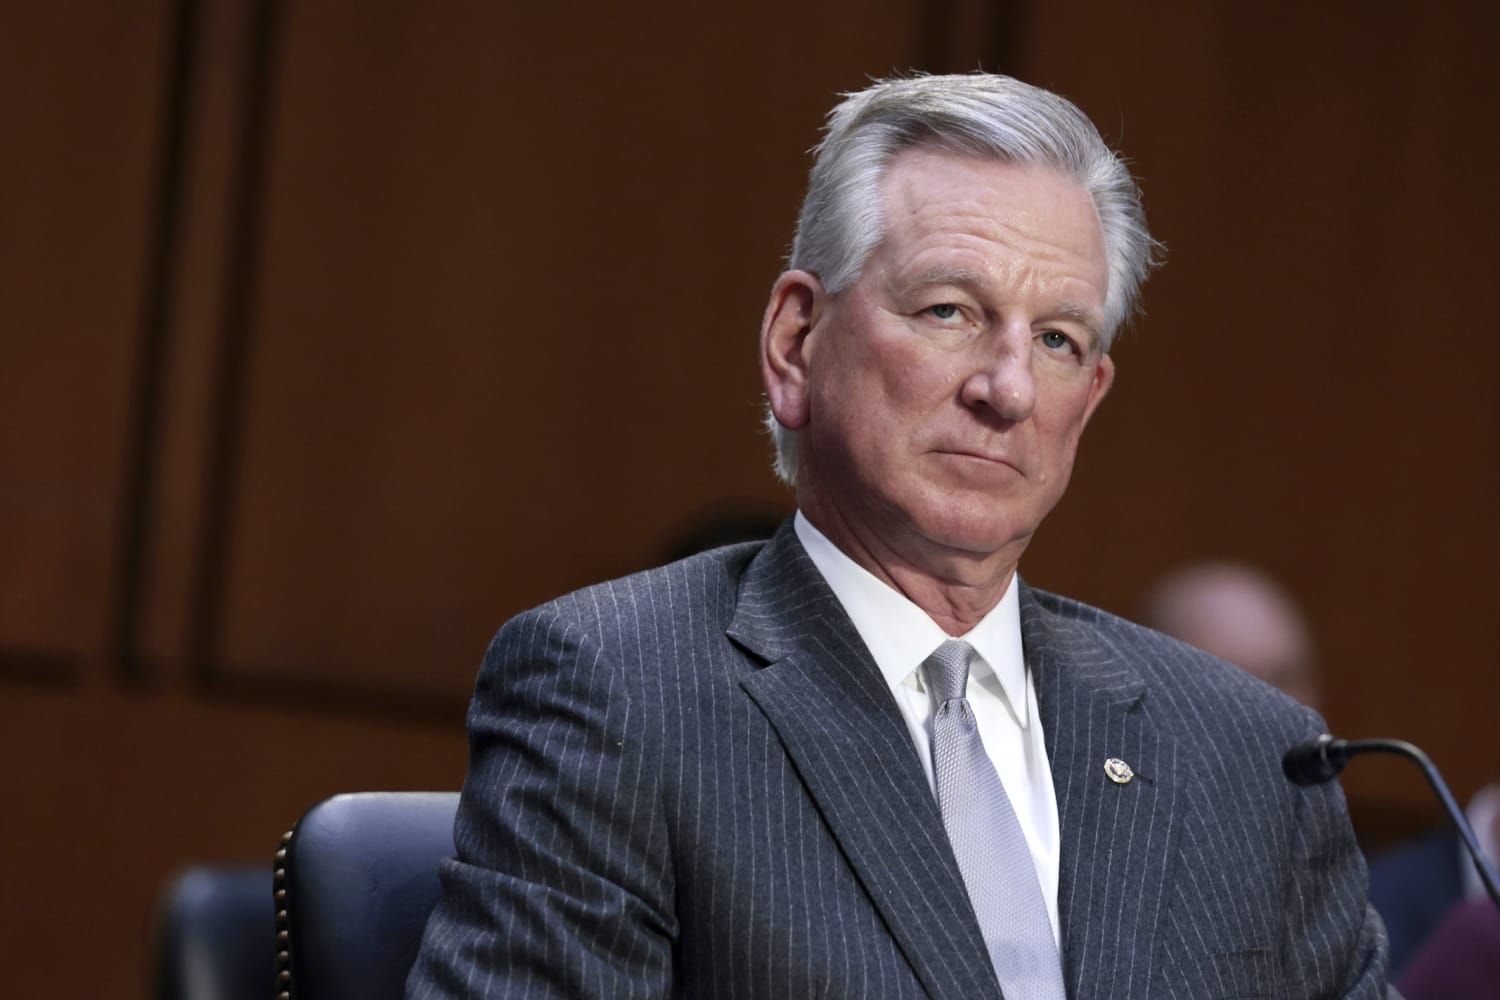 Tuberville’s pledge to veterans adds to the Republican’s troubles (msnbc.com)